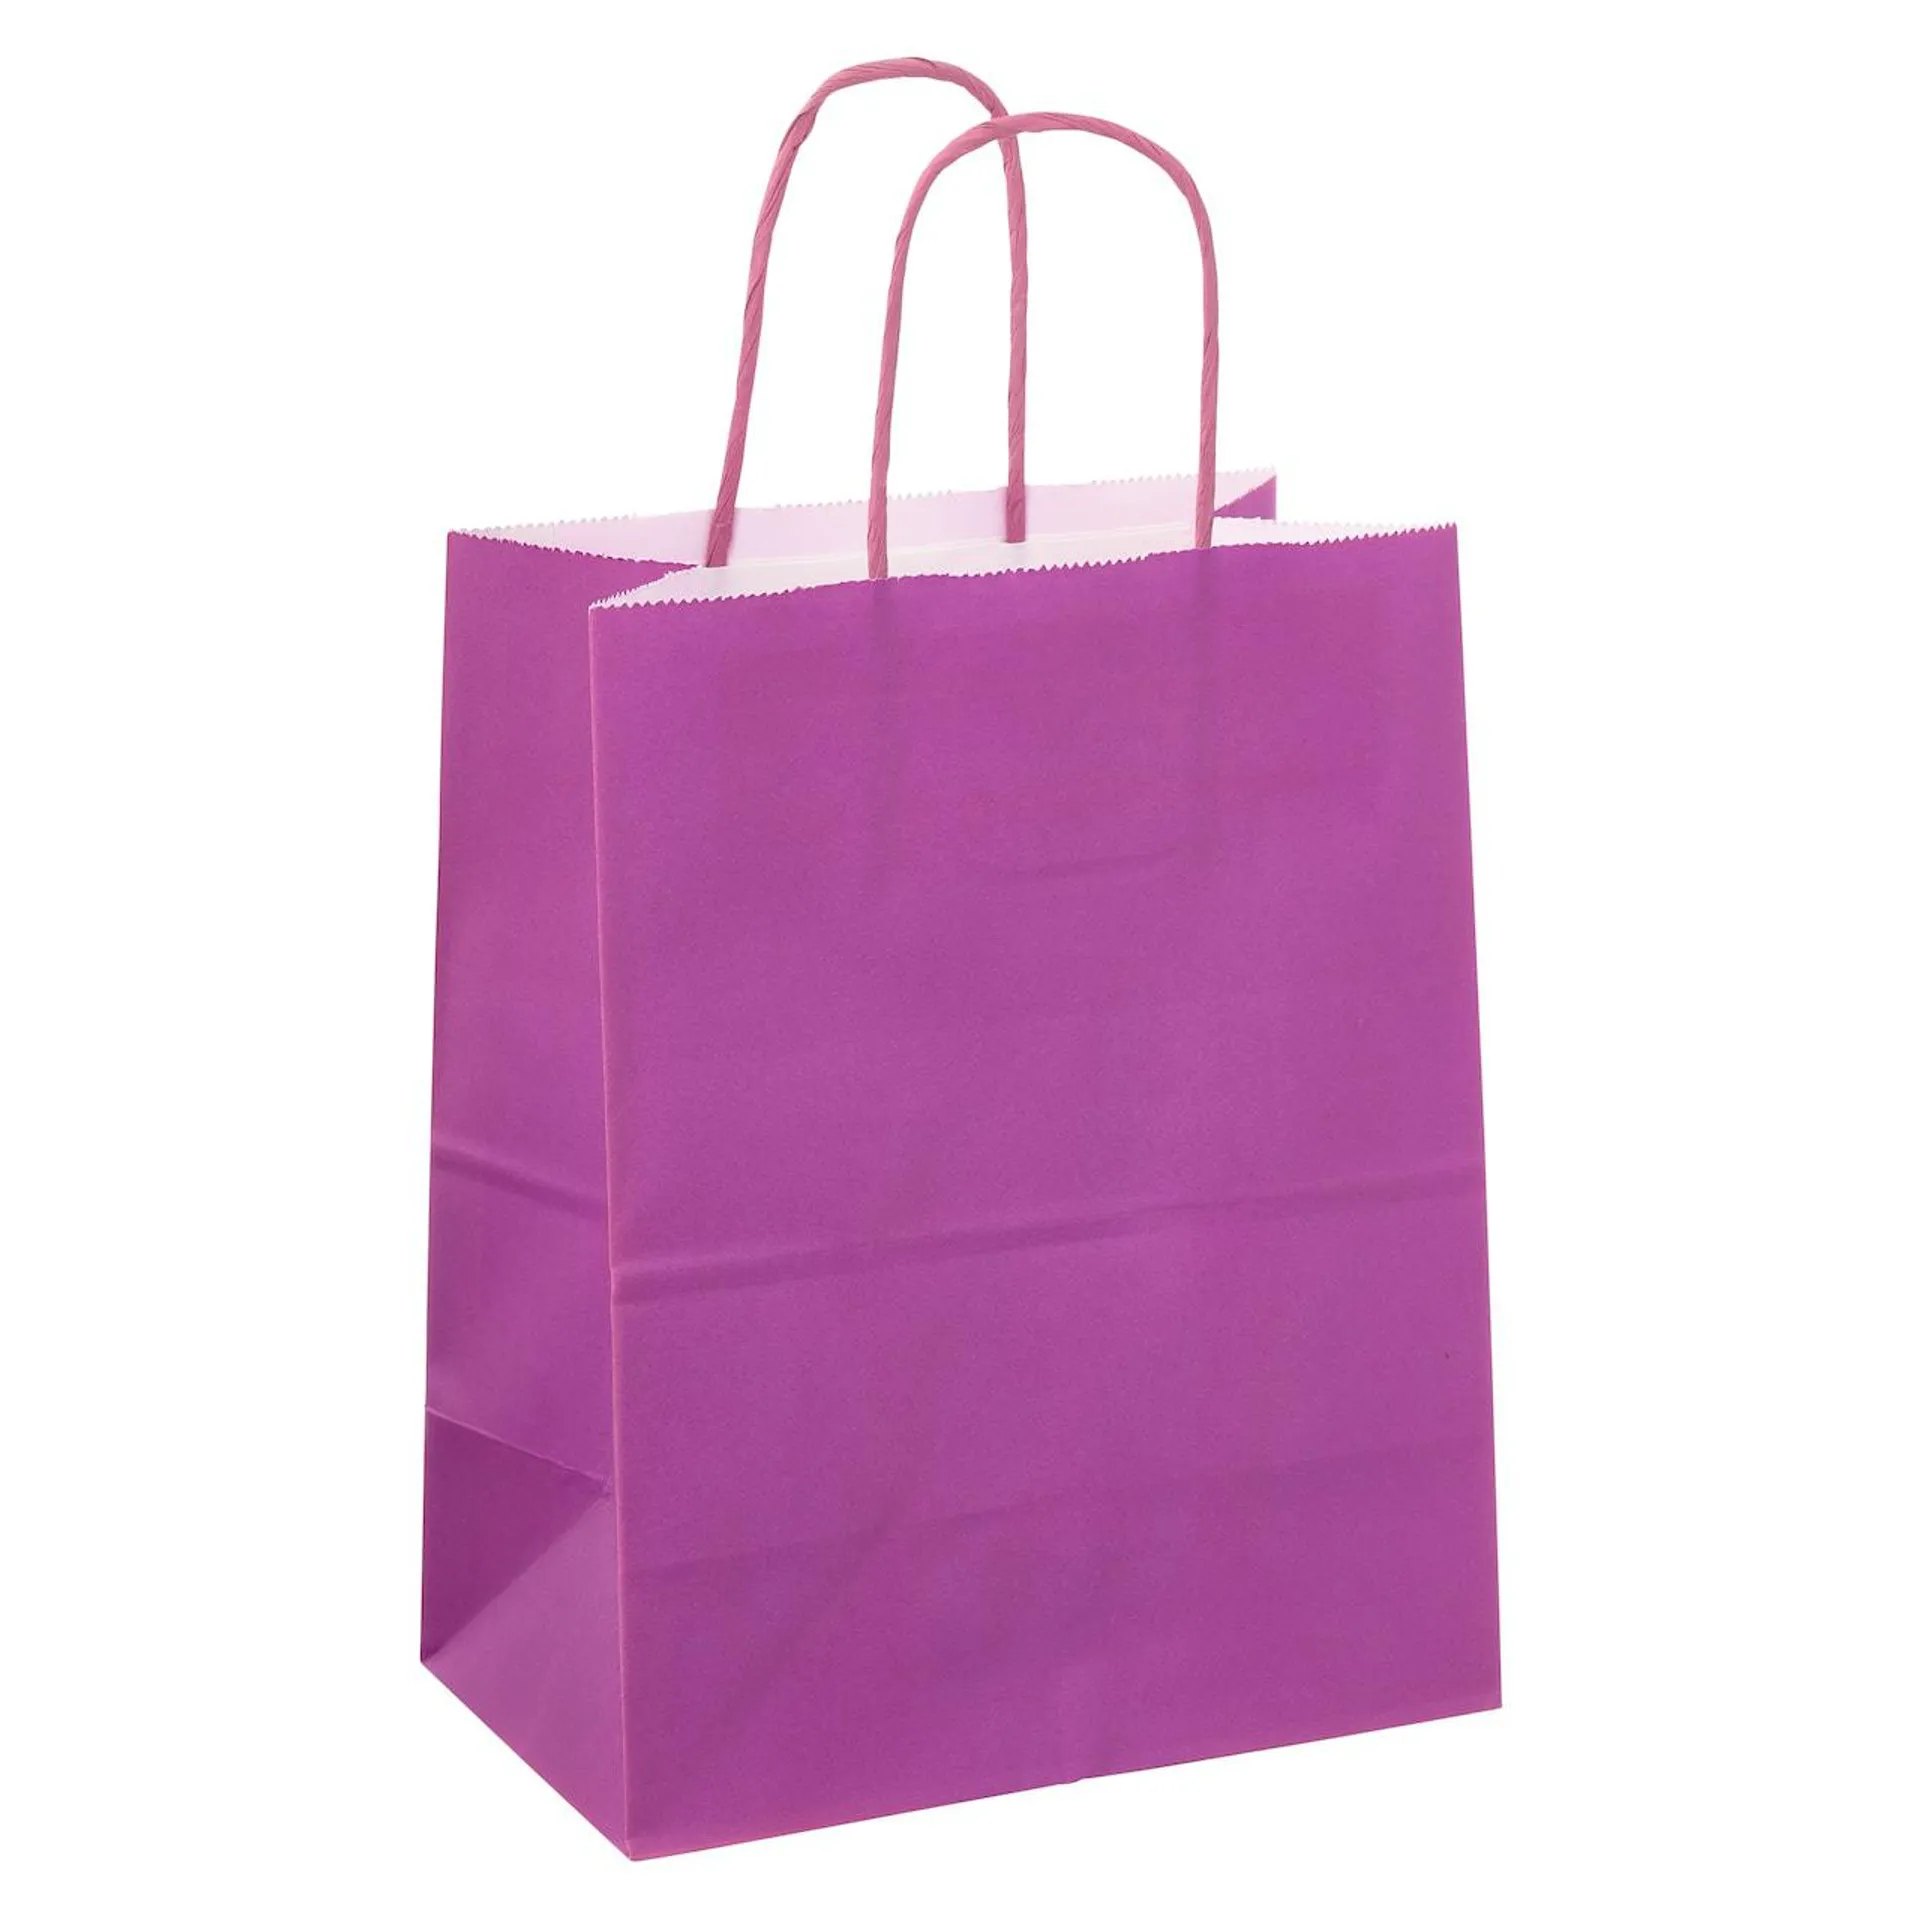 10 Packs: 13 ct. (130 total) Medium Bright Gifting Bags by Celebrate It™